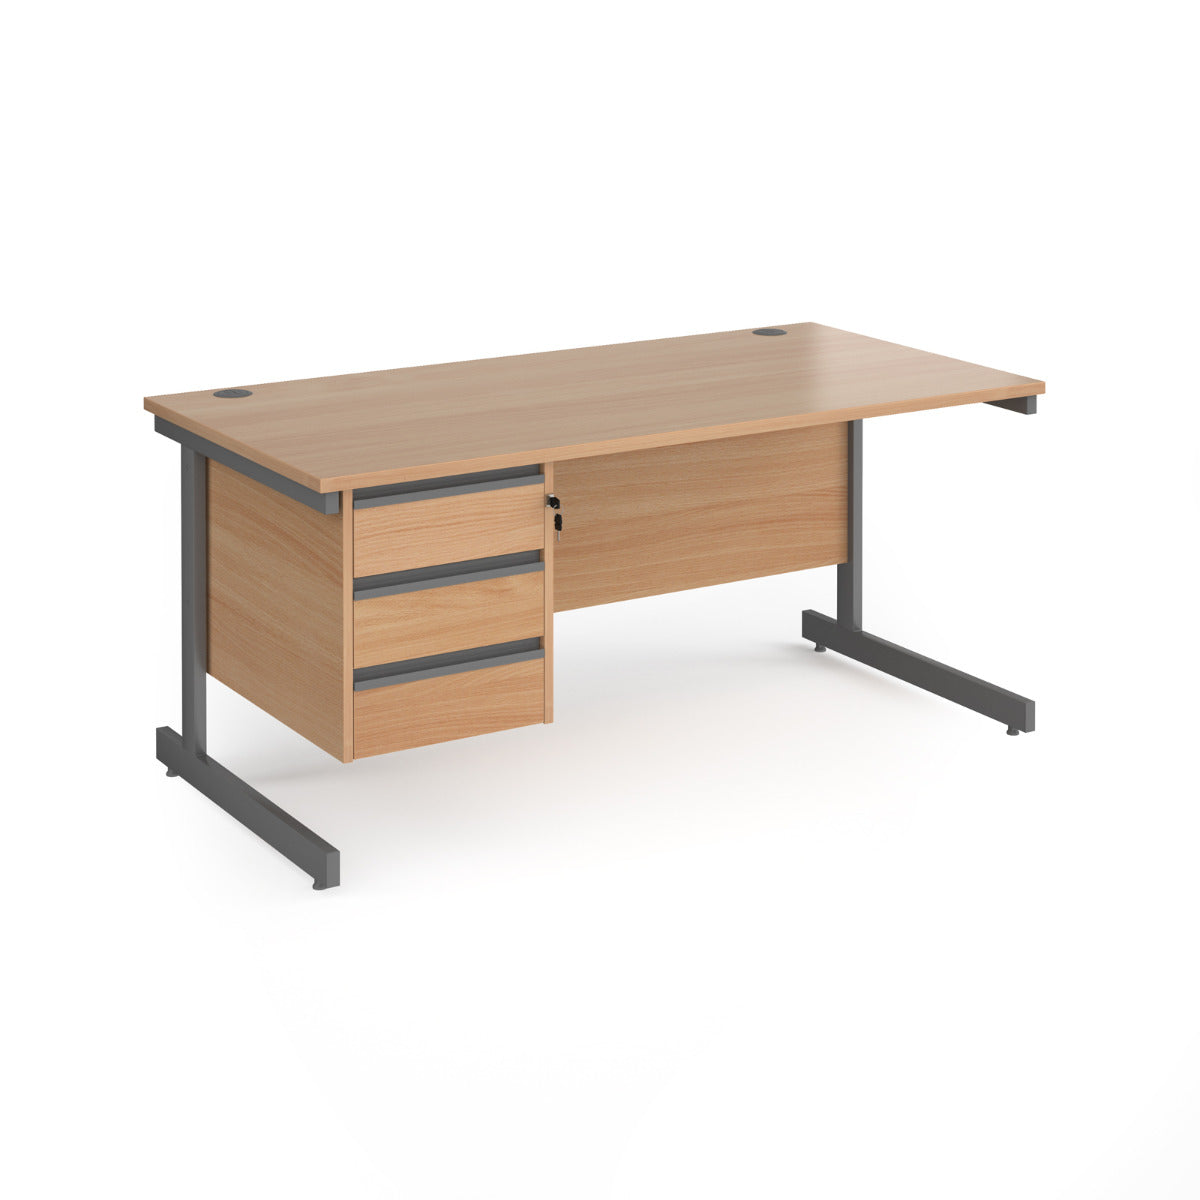 Contract Cantilever Leg Straight Office Desk with Three Drawer Storage